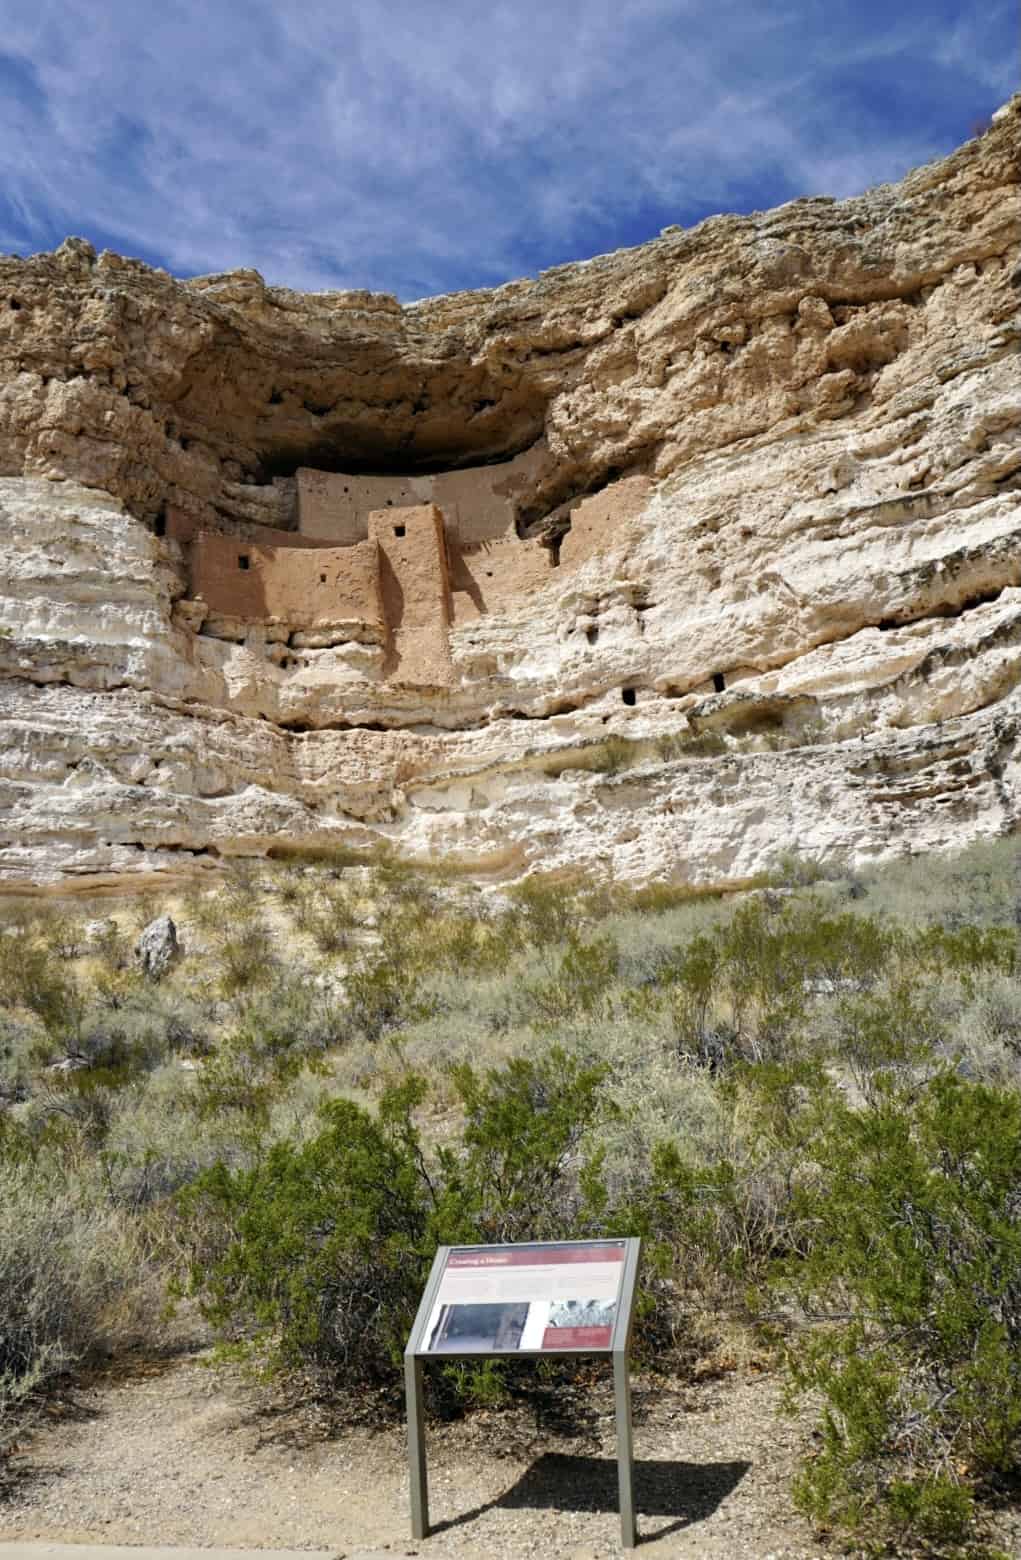 Montezuma Castle National Monument is a must-do...things to see between Phoenix and Sedona